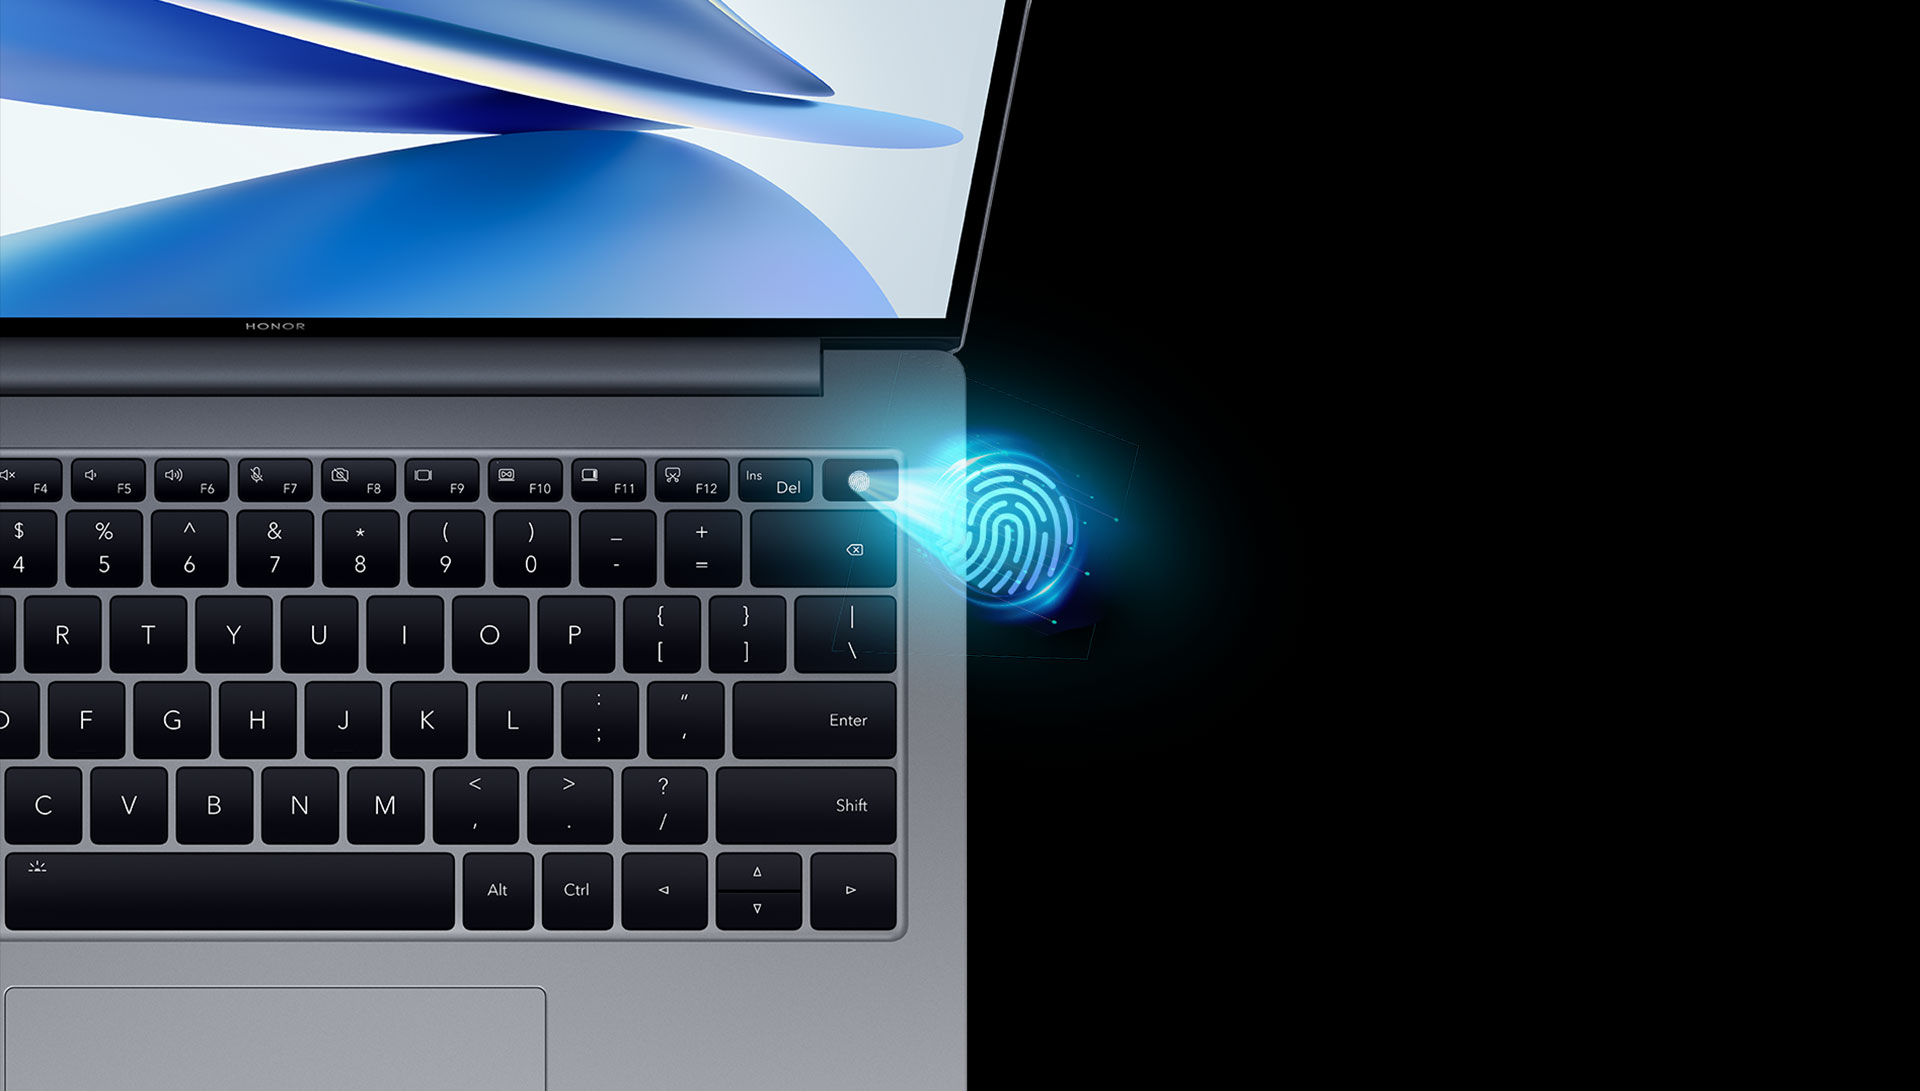 One-Touch Direct Access With the 2-in-1 Fingerprint Sensor & Power Button